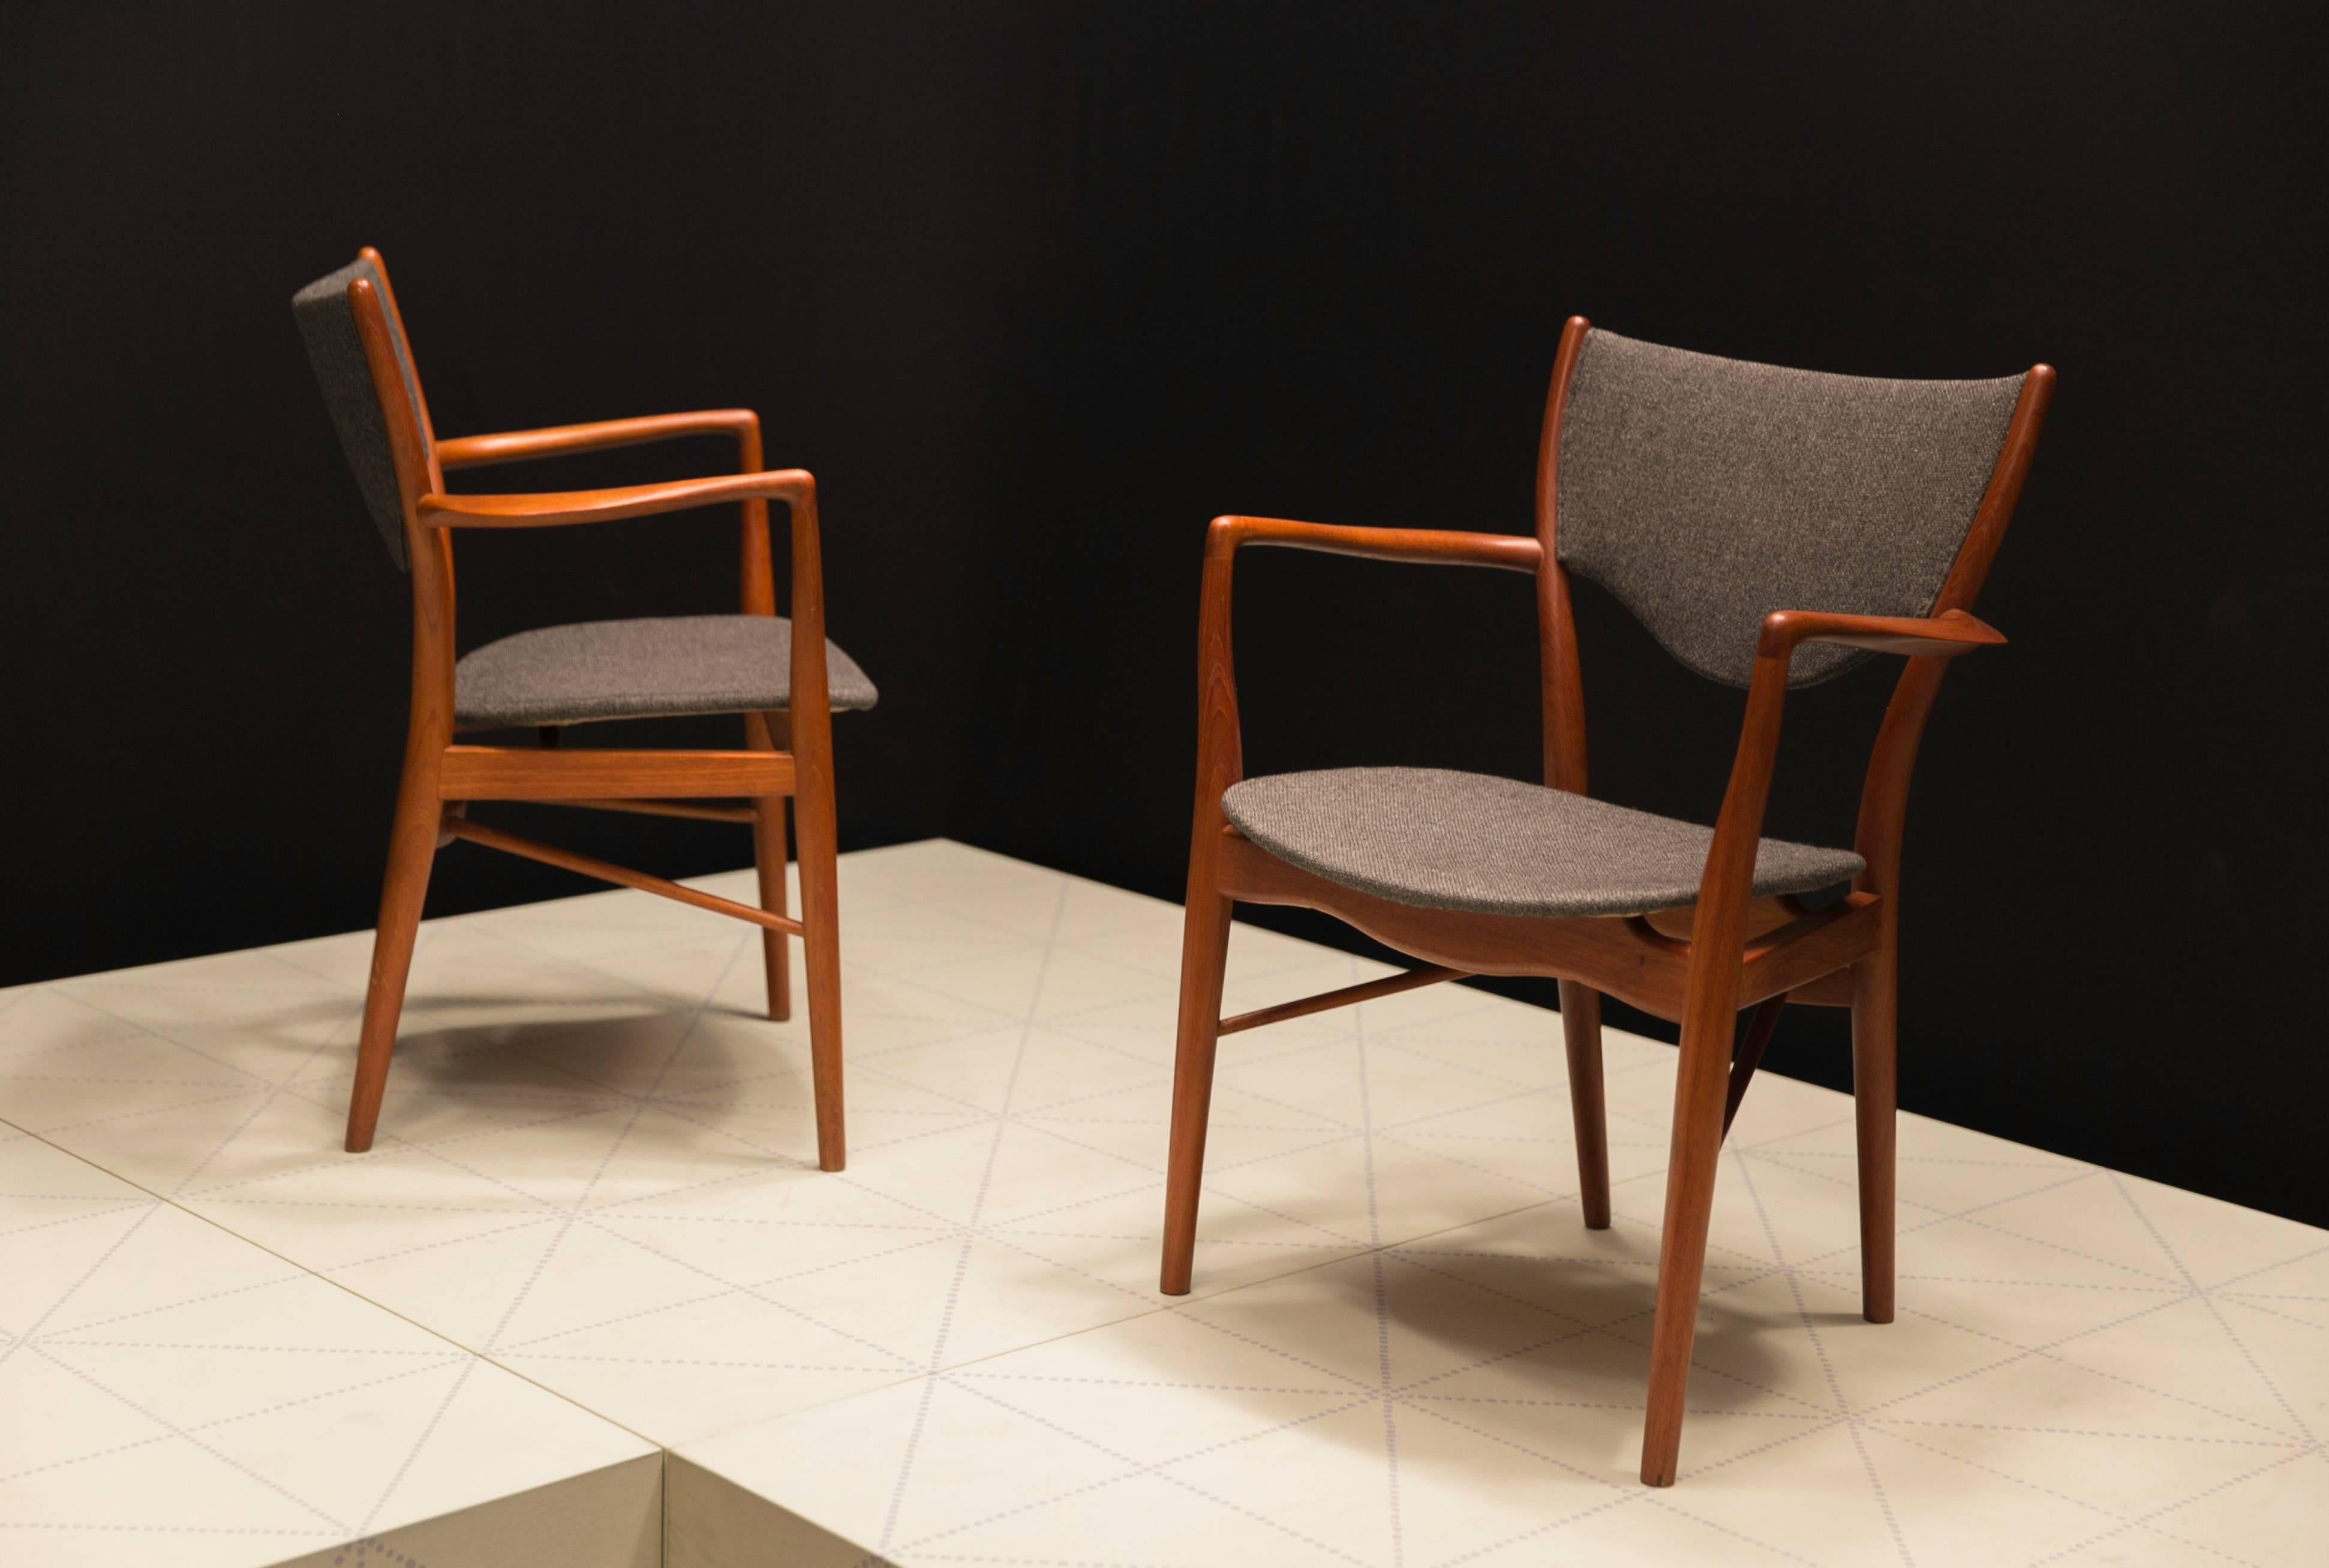 Pair of Finn Juhl BO-46 Chairs in Teak and Original Charcoal Wool Seats. Finn Juhl originally designed this chair for cabinetmaker Niels Vodder in 1946. In his second version, made by Bovirke from 1953, Finn Juhl's aim was to emphasize the lightness